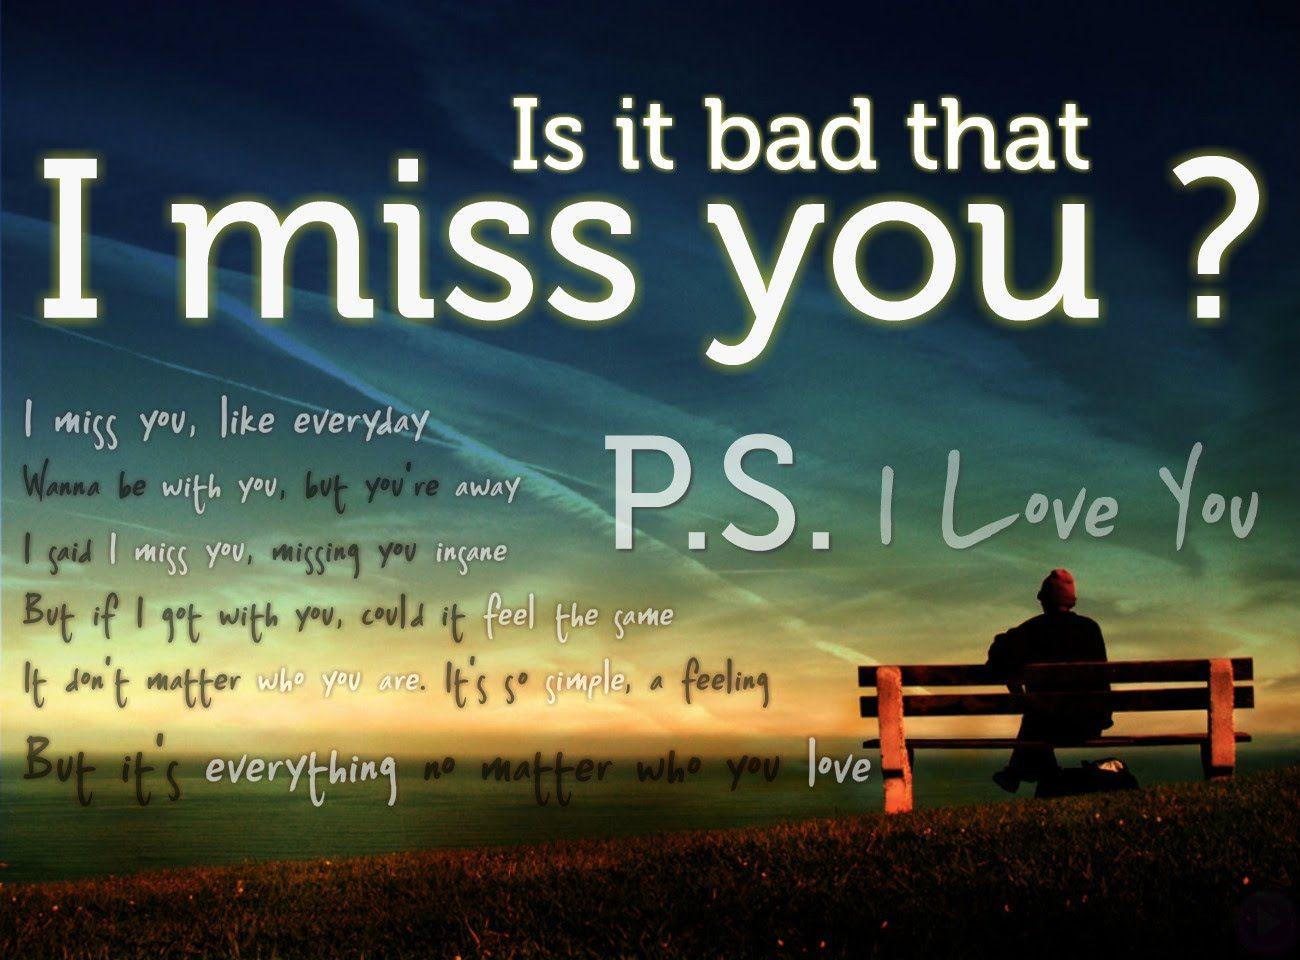 I Miss You New Image